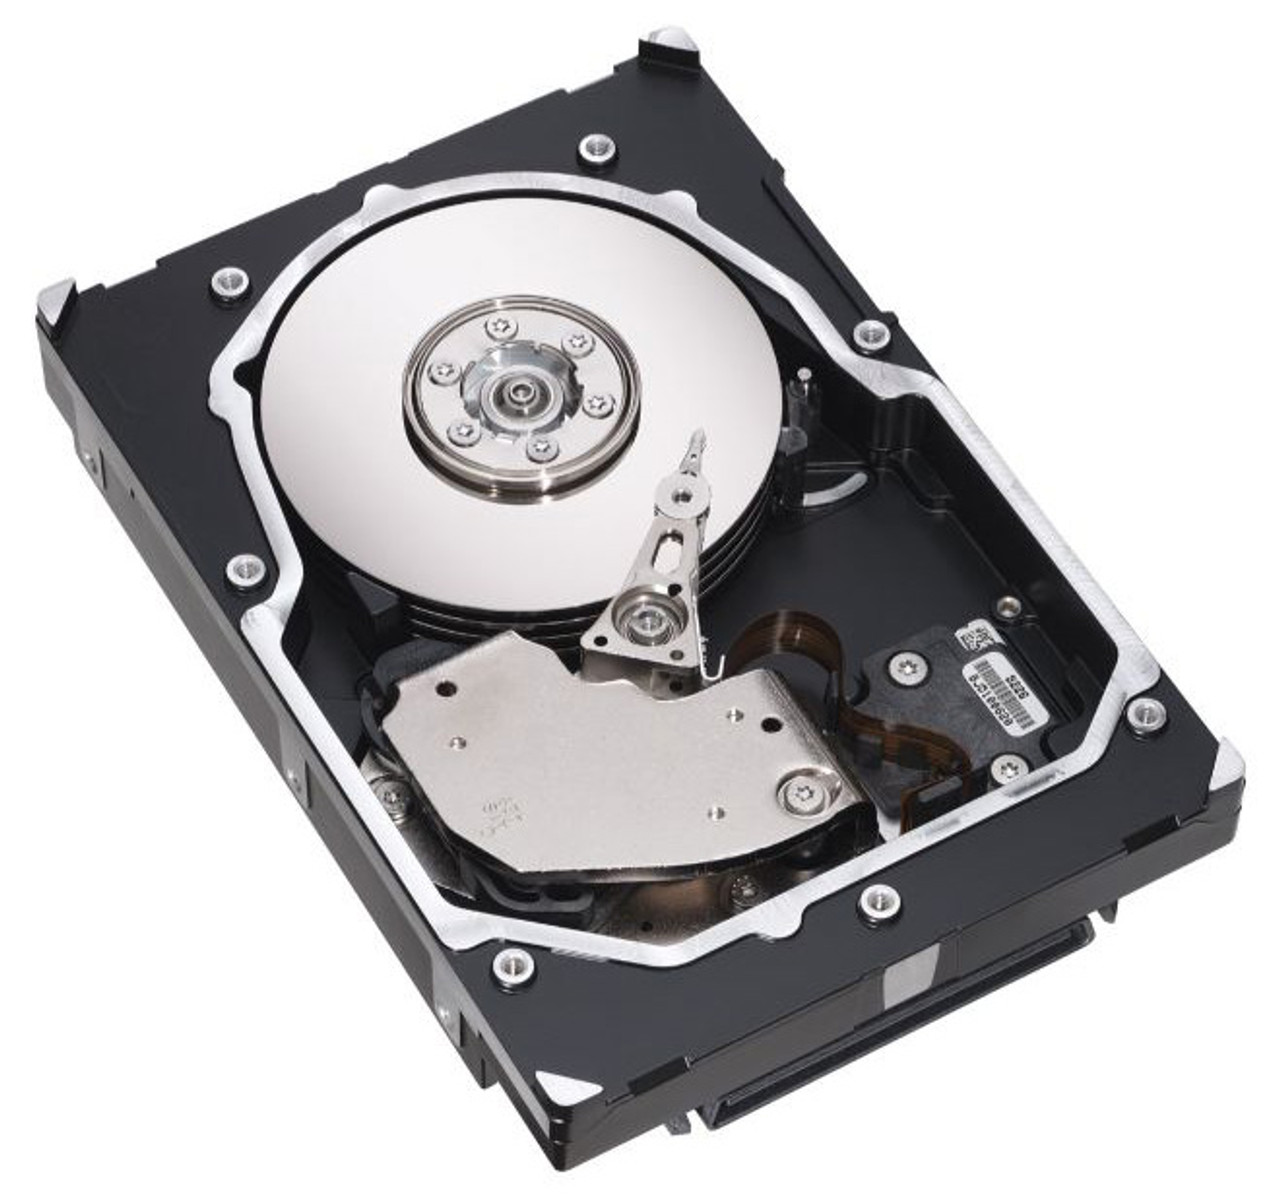 X271 NetApp 36.7GB 15000RPM Fibre Channel 2Gbps 8MB Cache 3.5-inch Internal Hard Drive for DS14/DS14MK2